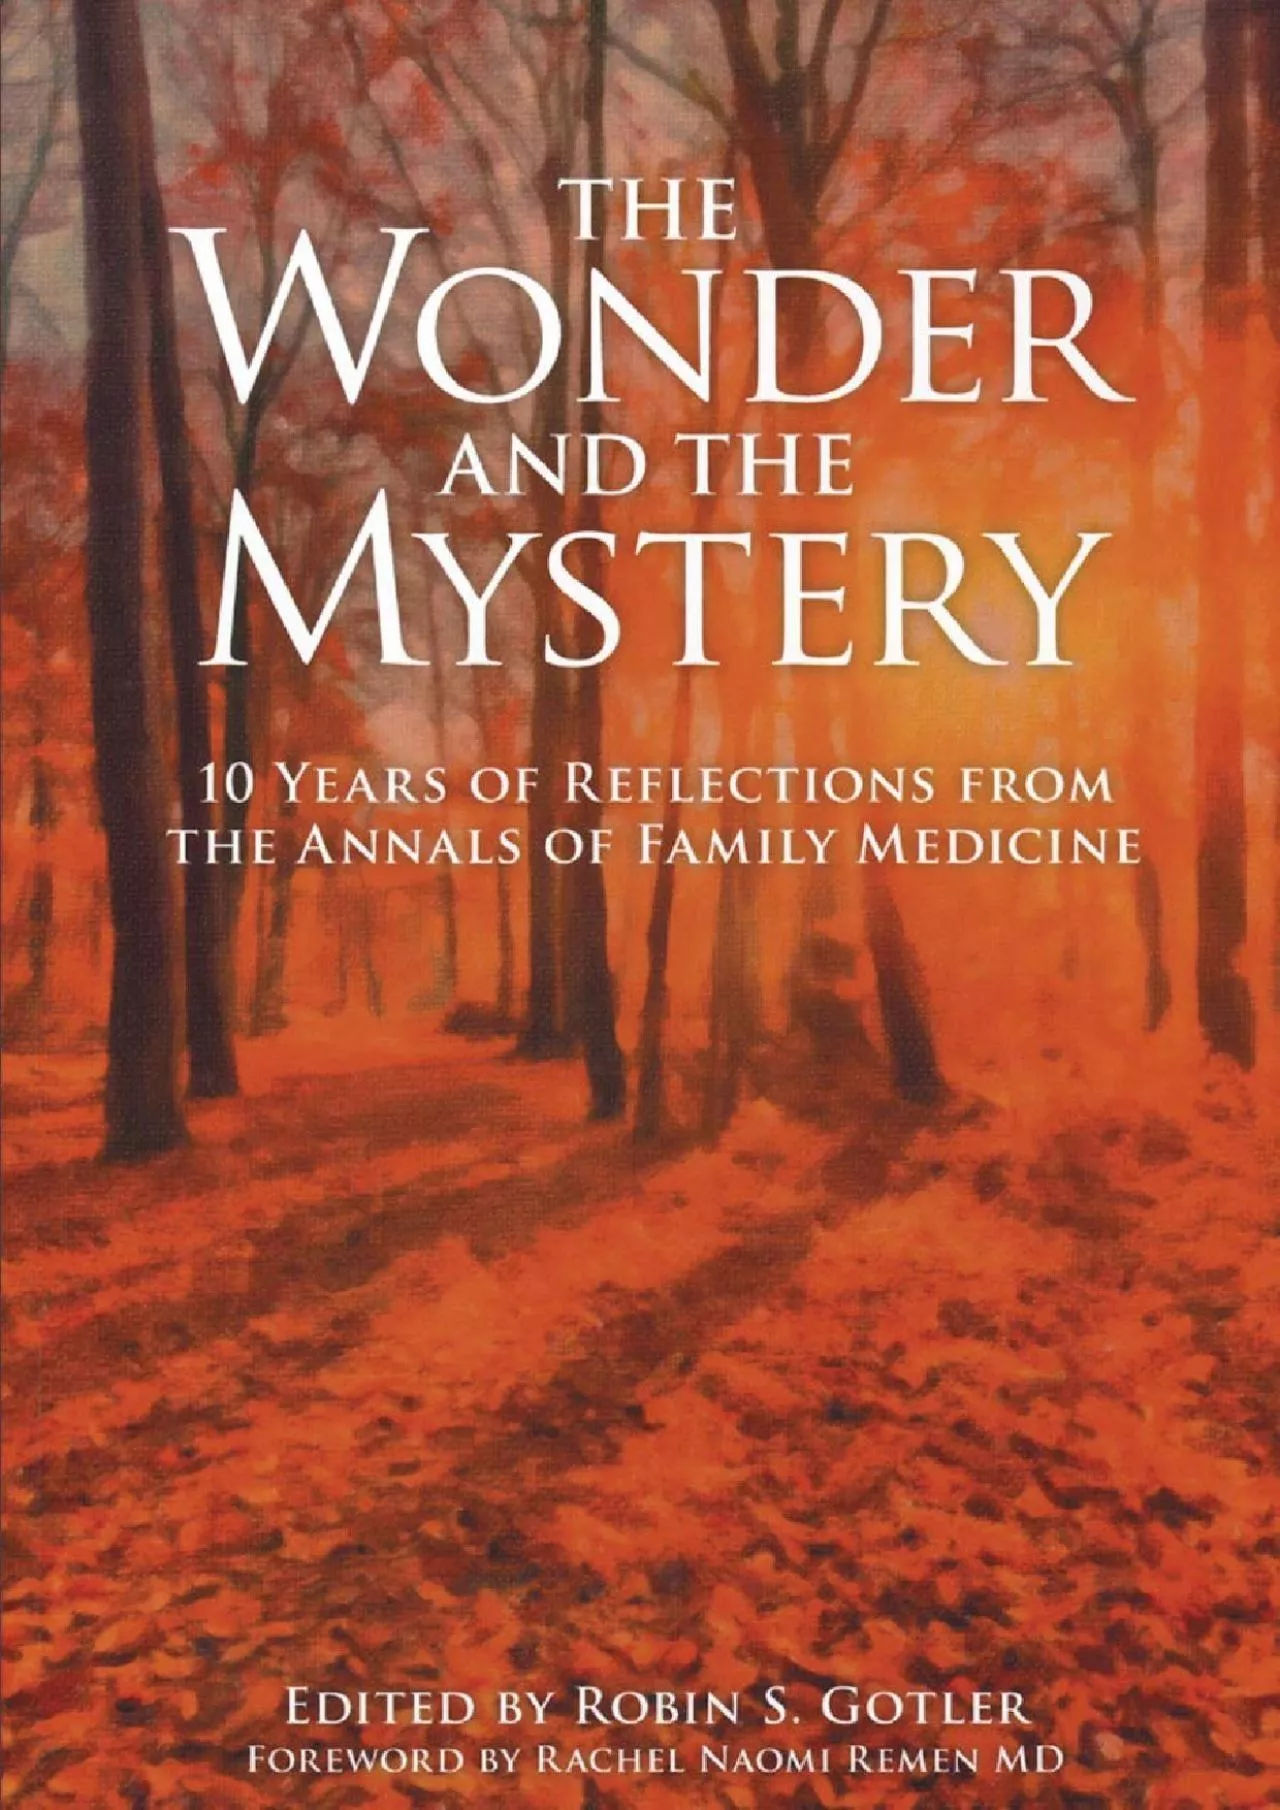 (DOWNLOAD)-The Wonder and the Mystery: 10 Years of Reflections from the Annals of Family